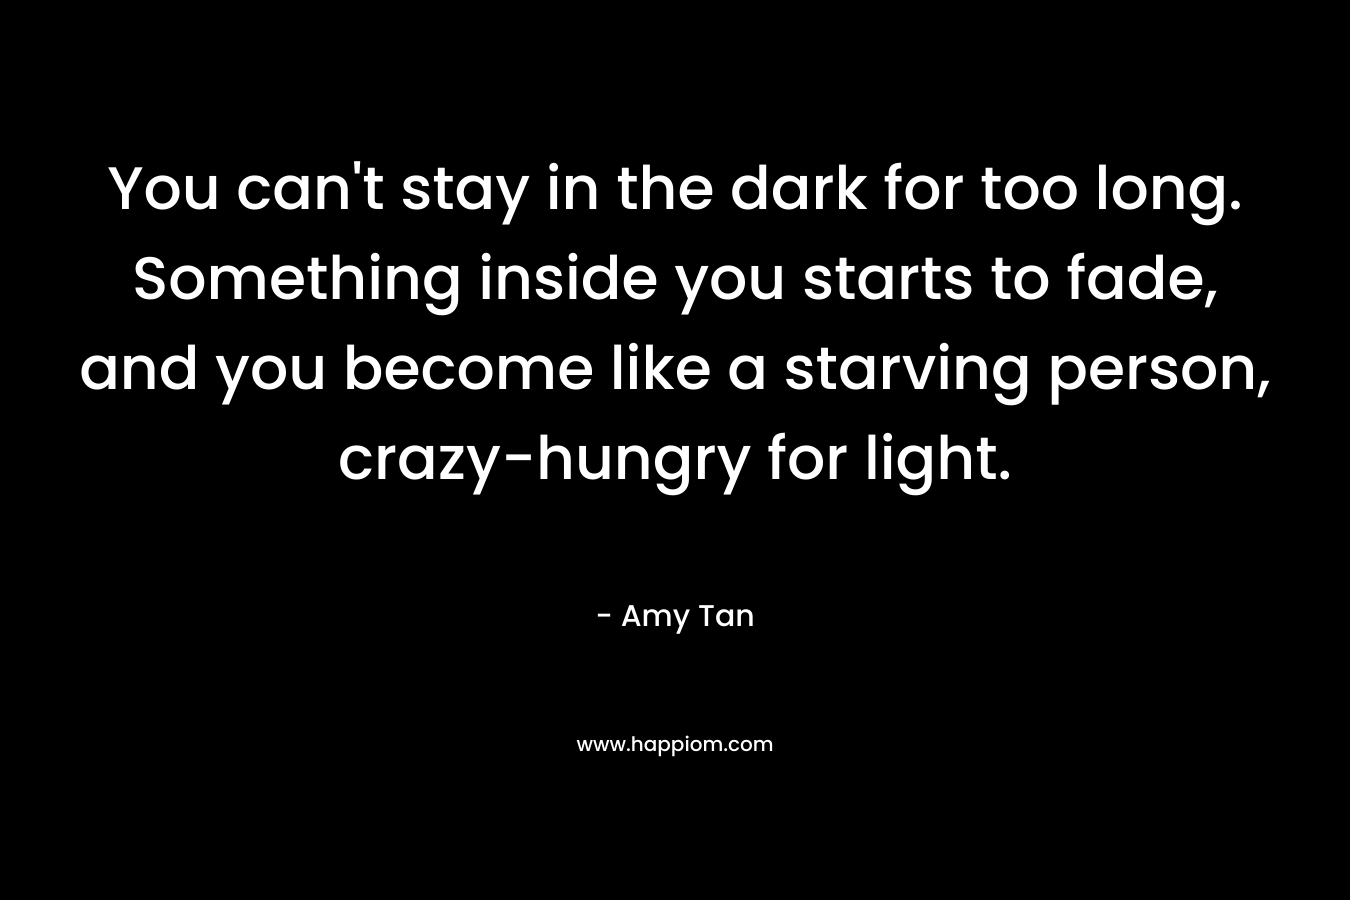 You can't stay in the dark for too long. Something inside you starts to fade, and you become like a starving person, crazy-hungry for light.